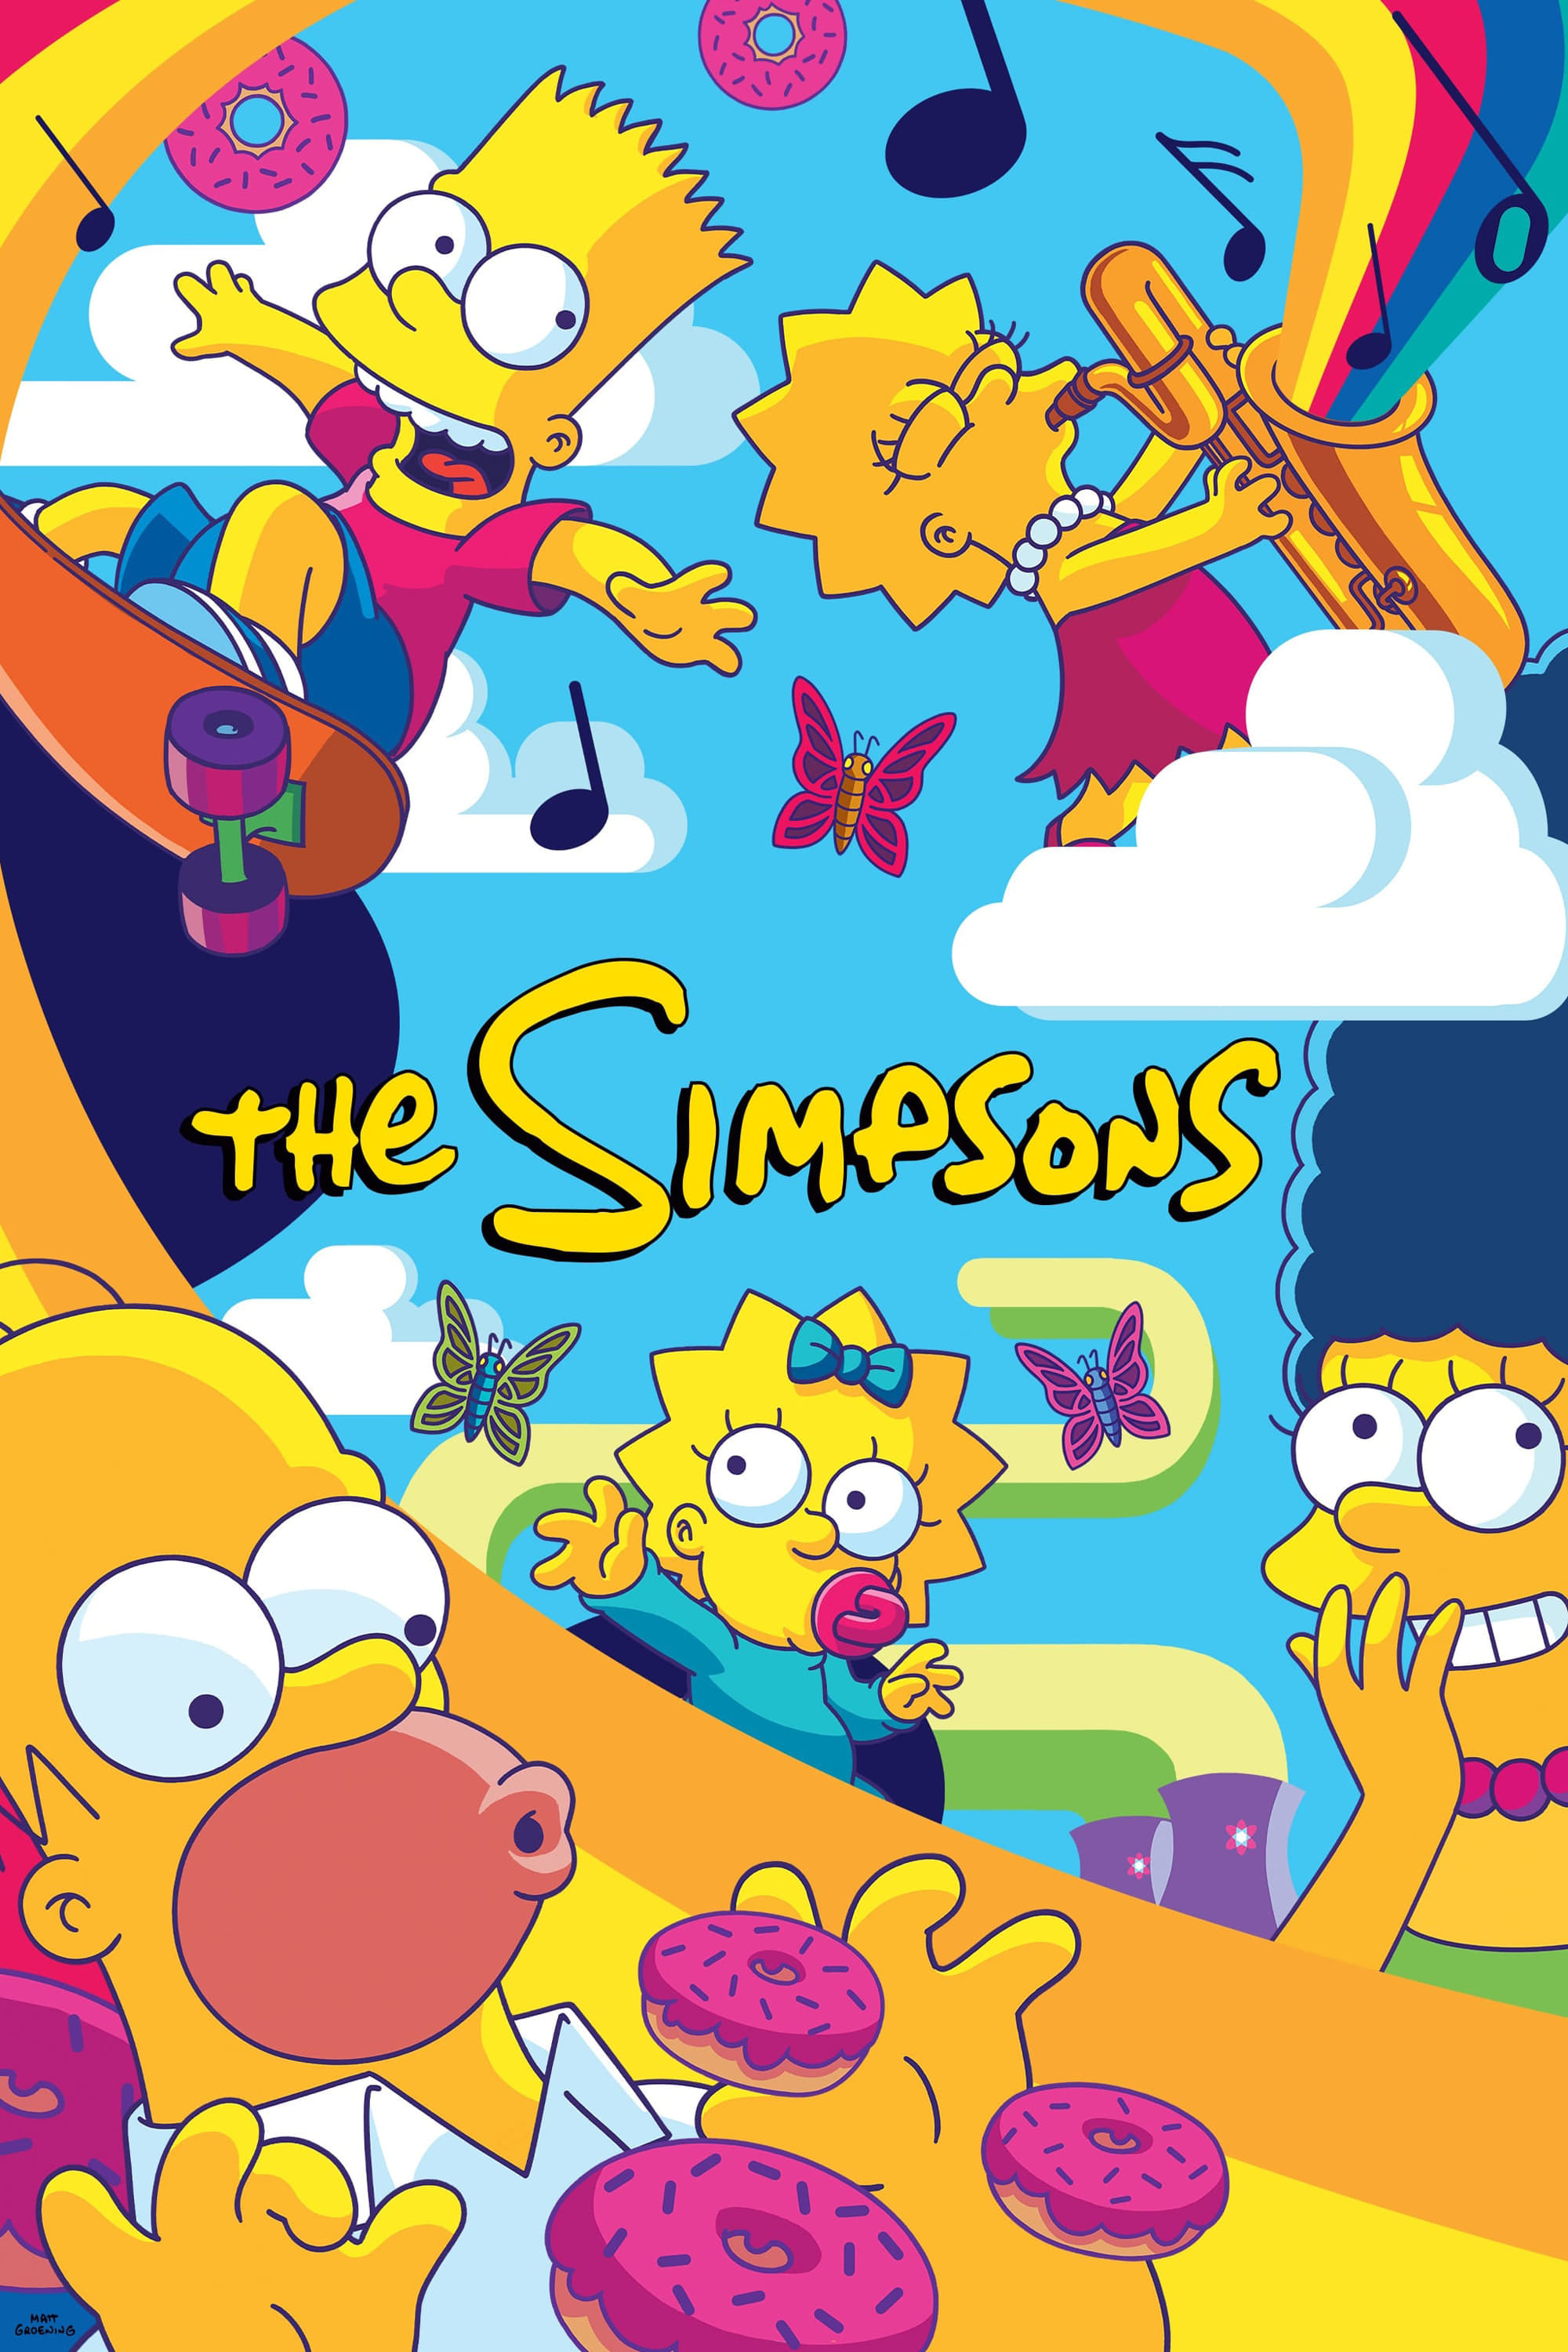 The Simpsons (S02E03)